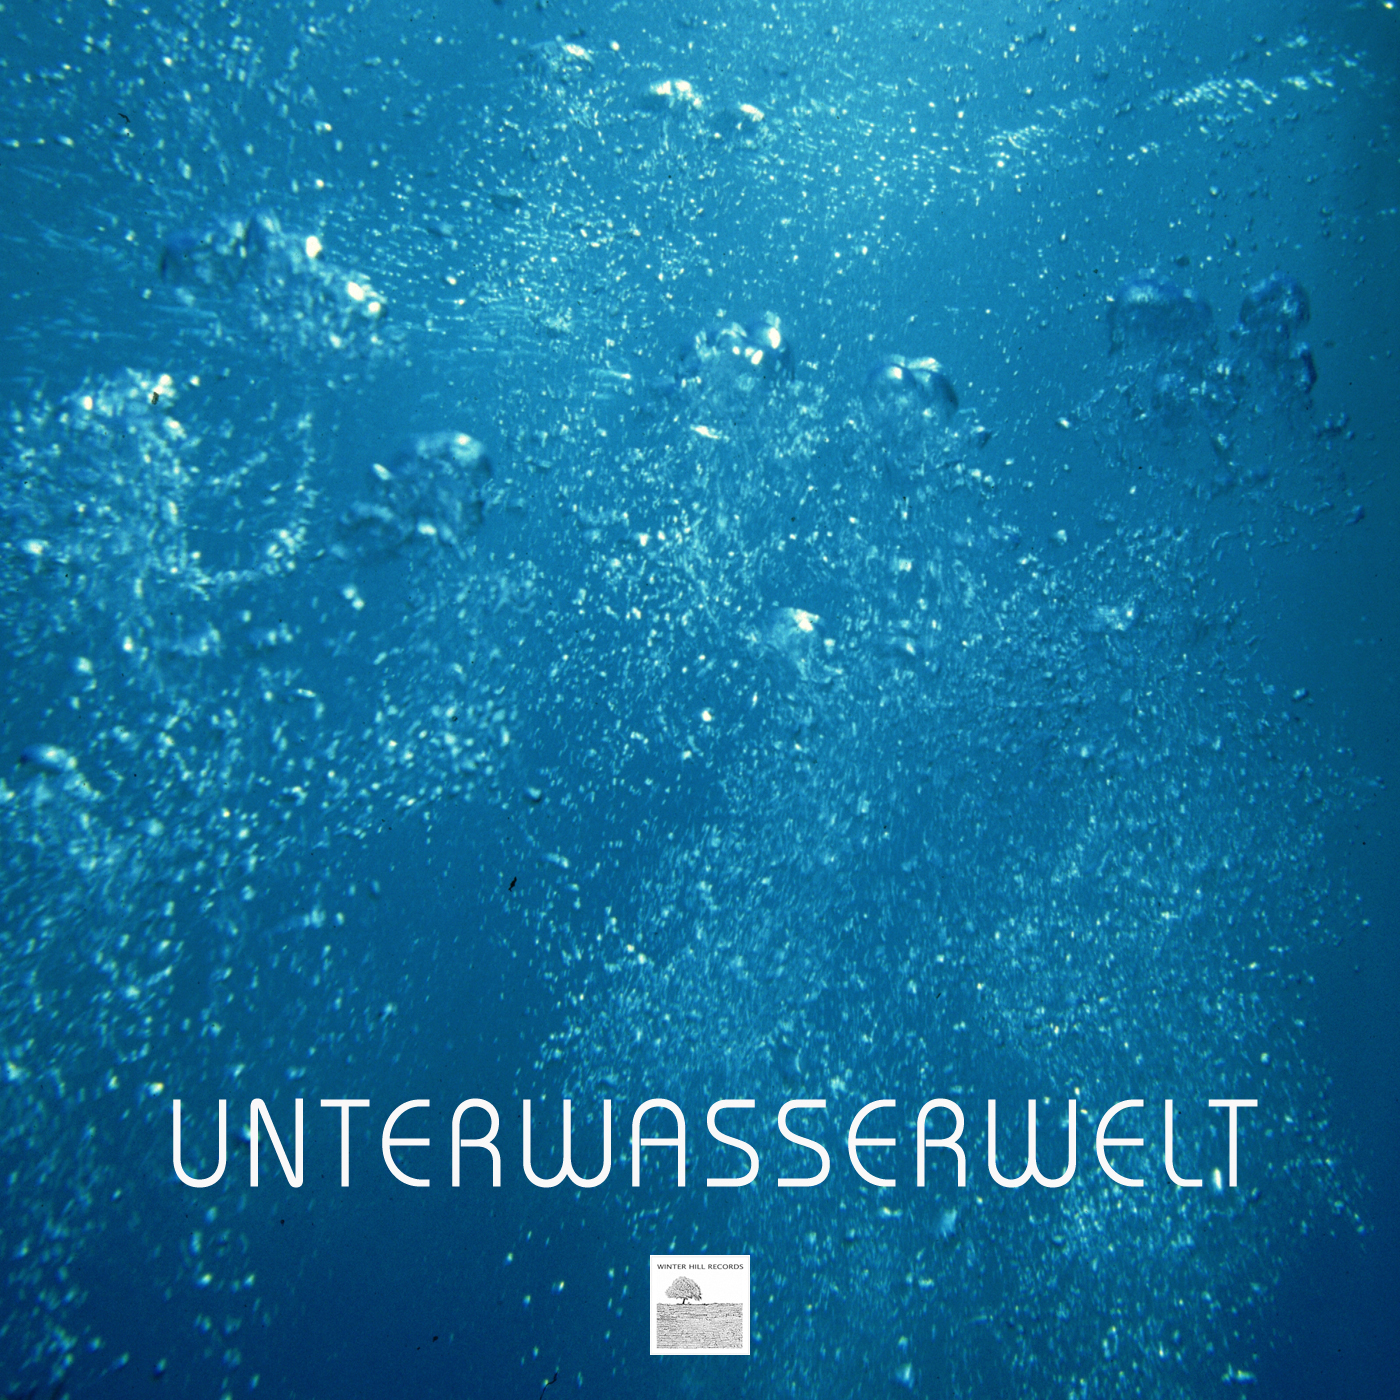 Musik zum Entspannen - Music for Deep Sleep with Underwater Sounds of the Sea - Autogenes Training Entspannung